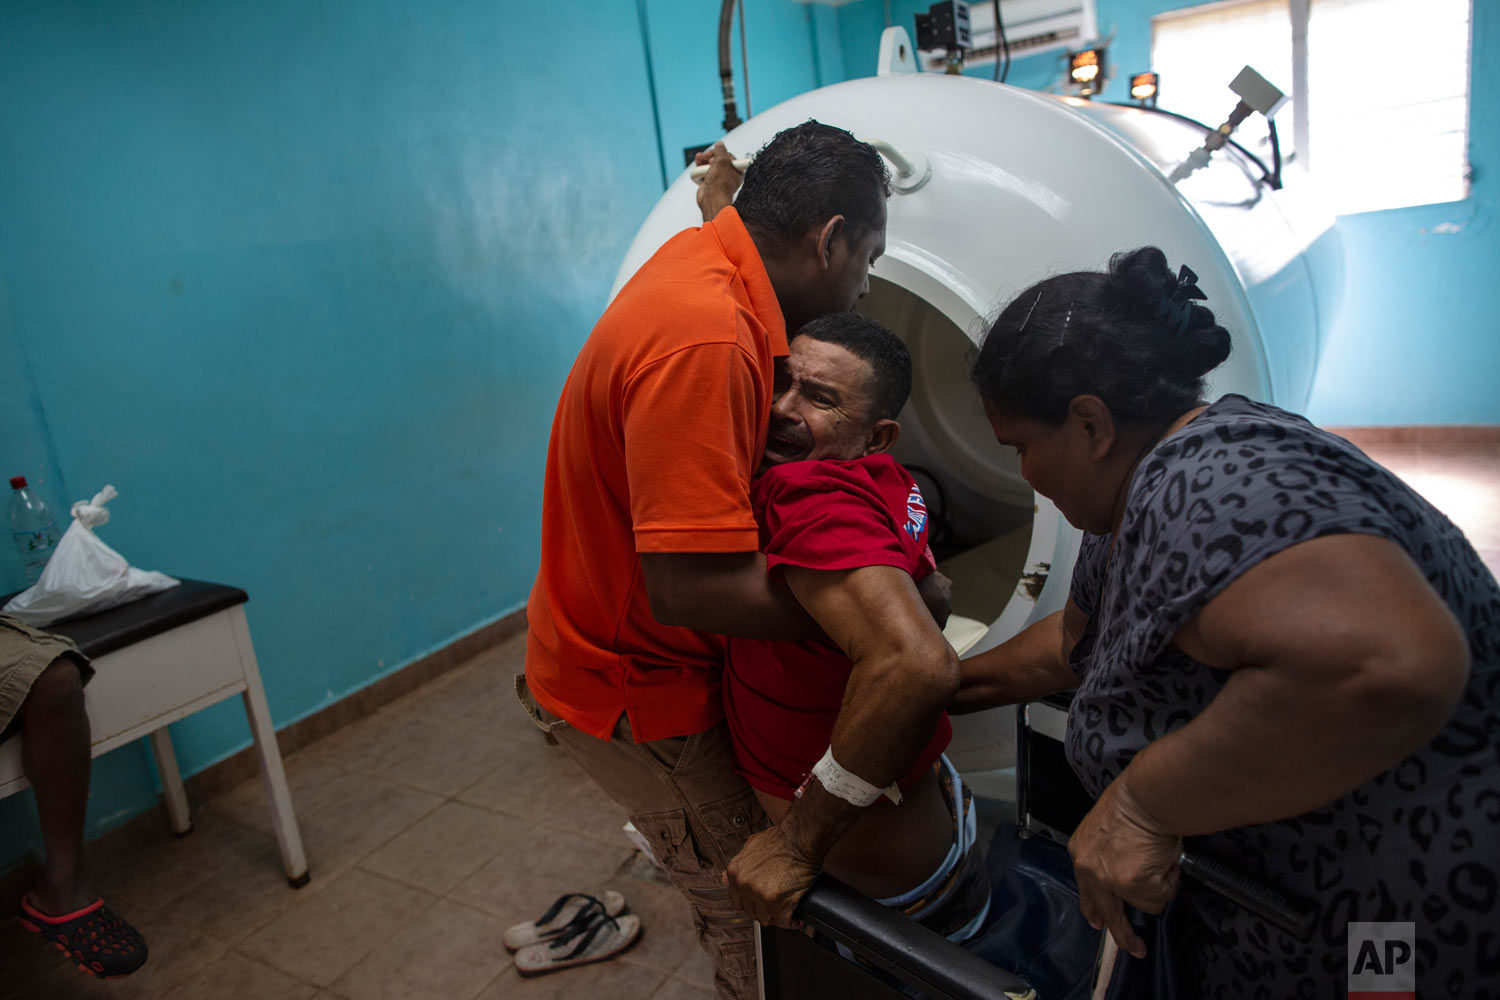  In this Feb. 9, 2018 photo, paralyzed by decompression sickness, lobster diver Misael Banegas Diaz, 49, is lifted by physical therapist Cedrak Waldan Mendoza into a hyperbaric chamber at the hospital in Puerto Lempira, Honduras. (AP Photo/Rodrigo Ab